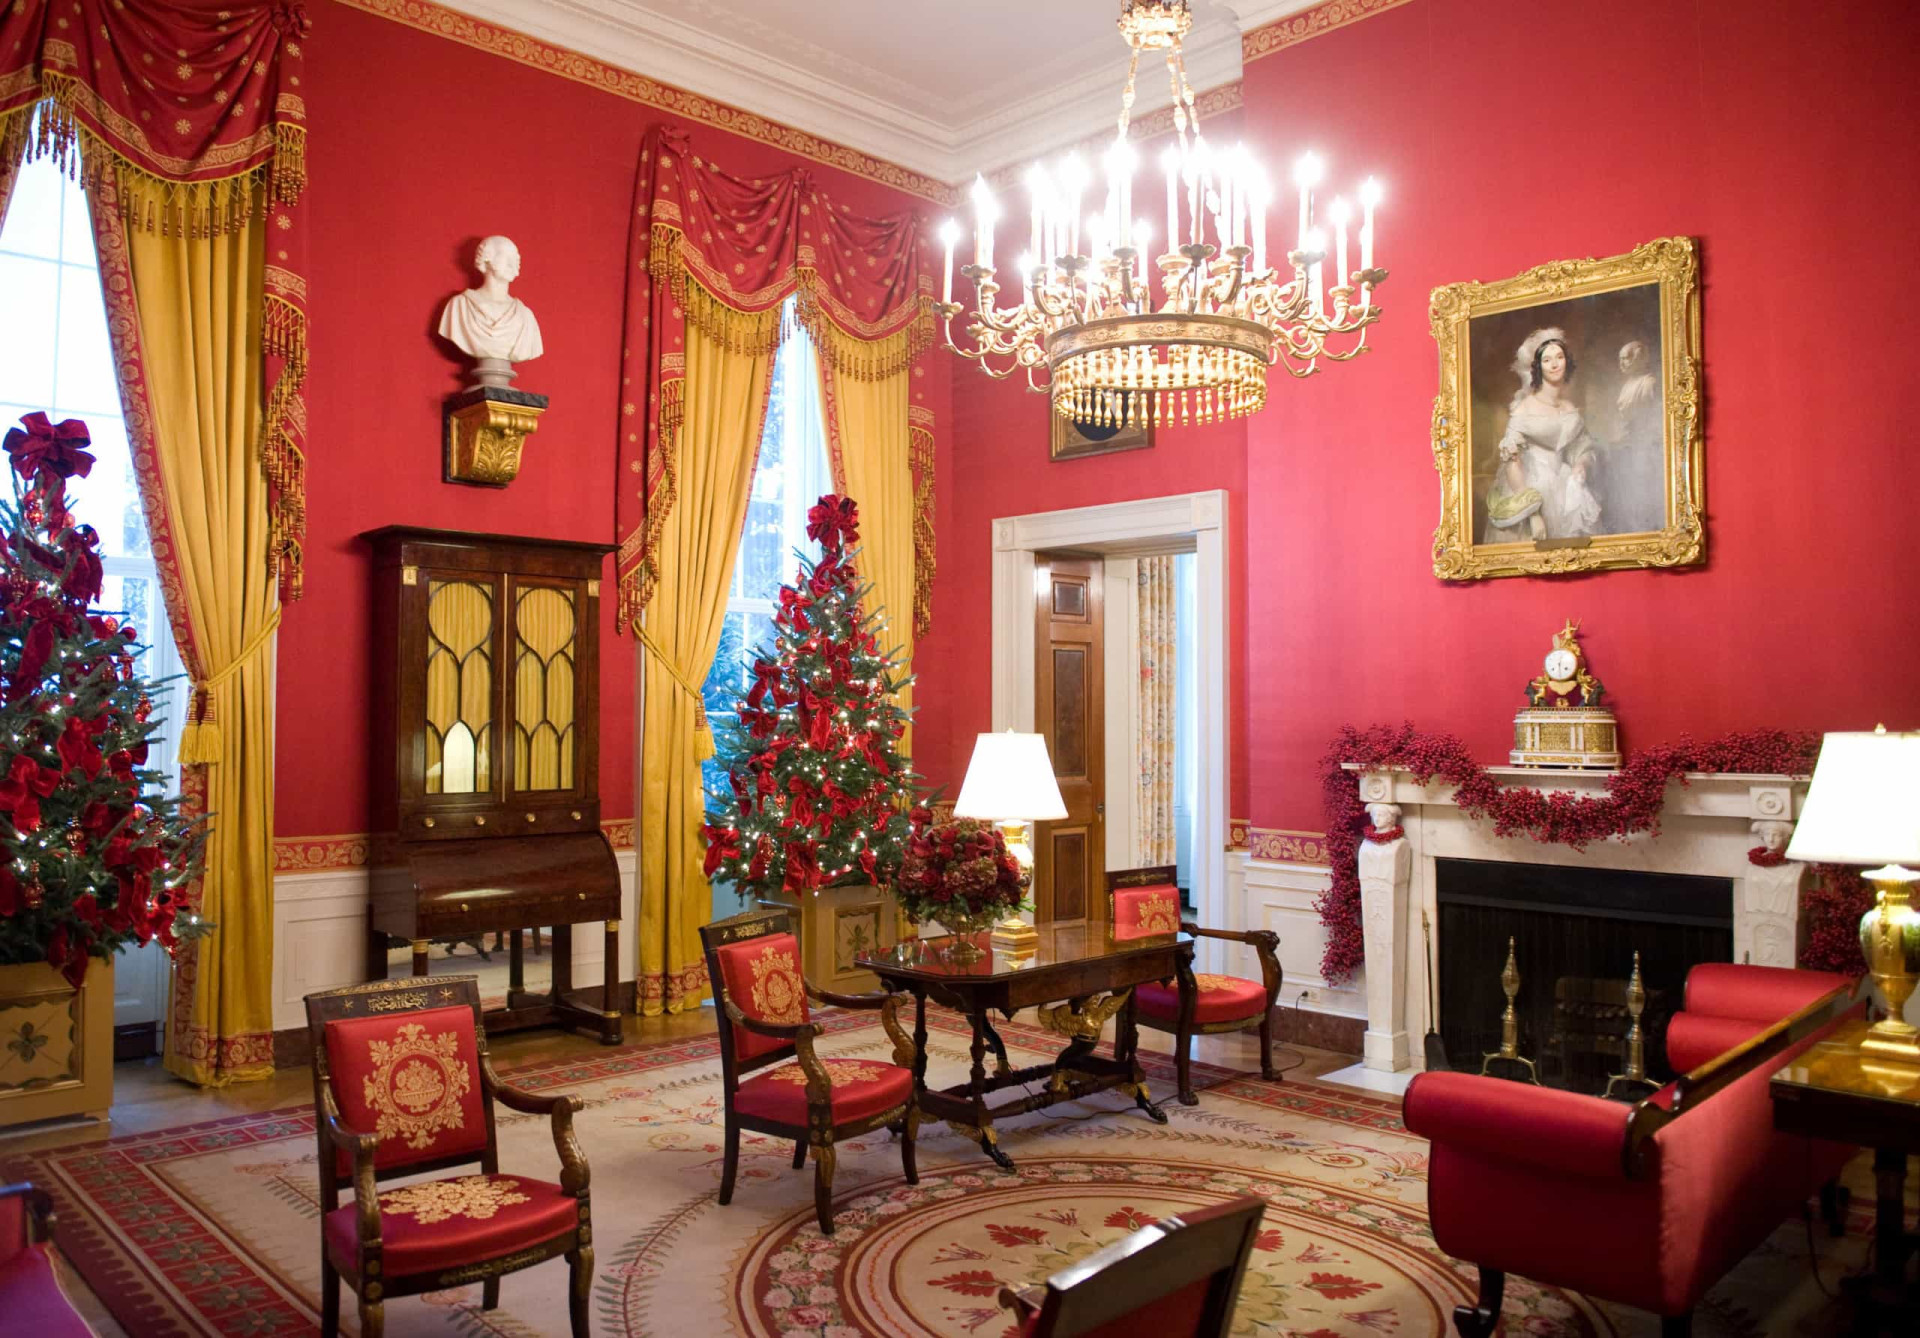 <p>First Ladies can give their own personal touch to their family's bedrooms for instance, but for public rooms and other spaces they'll need approval.</p><p><a href="https://www.msn.com/en-us/community/channel/vid-7xx8mnucu55yw63we9va2gwr7uihbxwc68fxqp25x6tg4ftibpra?cvid=94631541bc0f4f89bfd59158d696ad7e">Follow us and access great exclusive content every day</a></p>